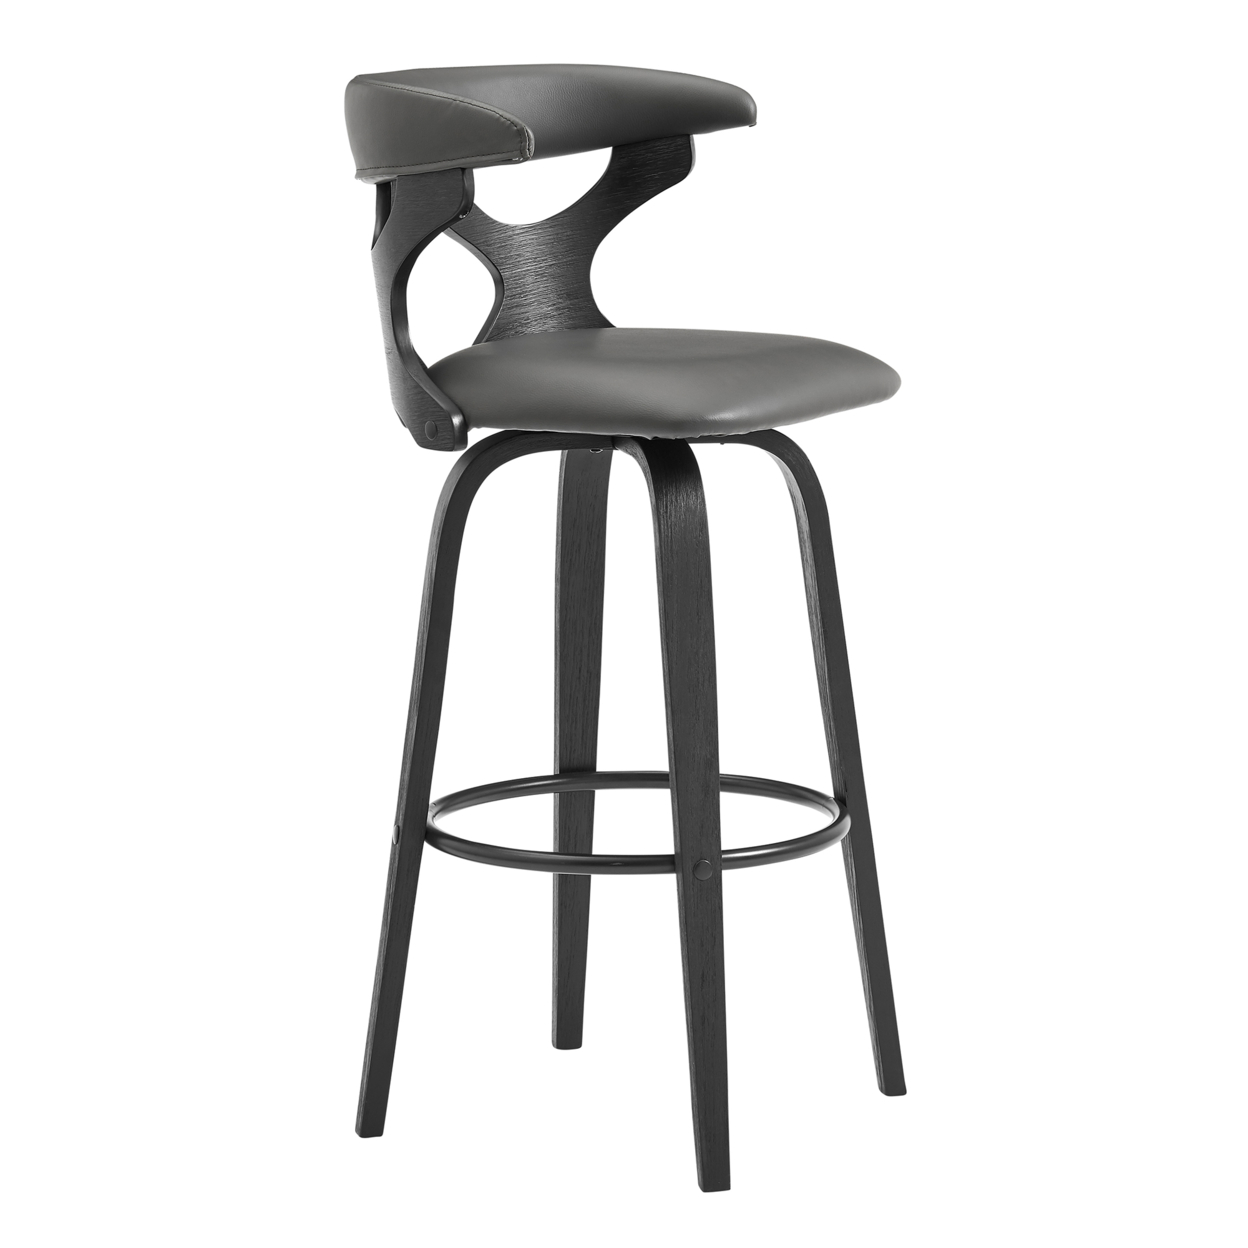 26 Inch Faux Leather Swivel Counter Stool, Black And Gray- Saltoro Sherpi